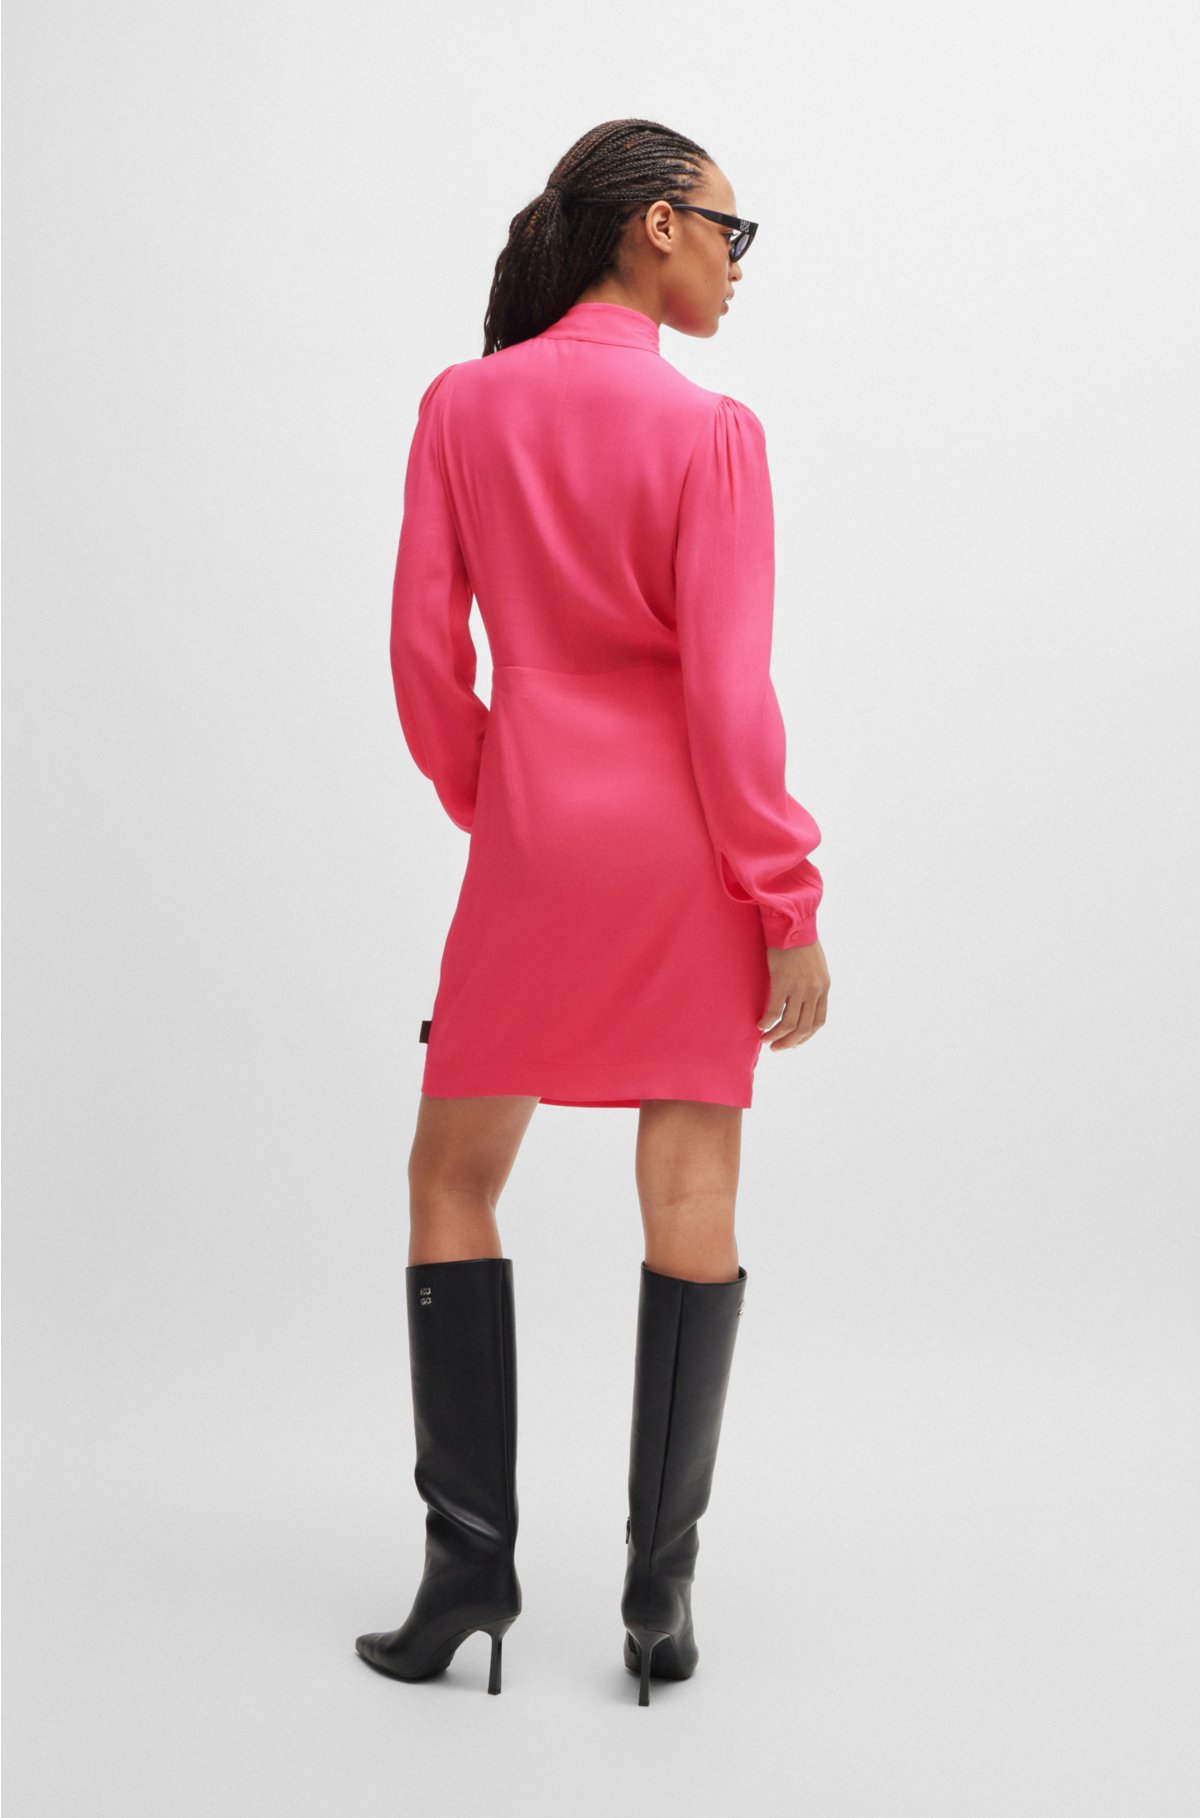 Long-sleeved dress in crepe fabric with bow neckline, Pink